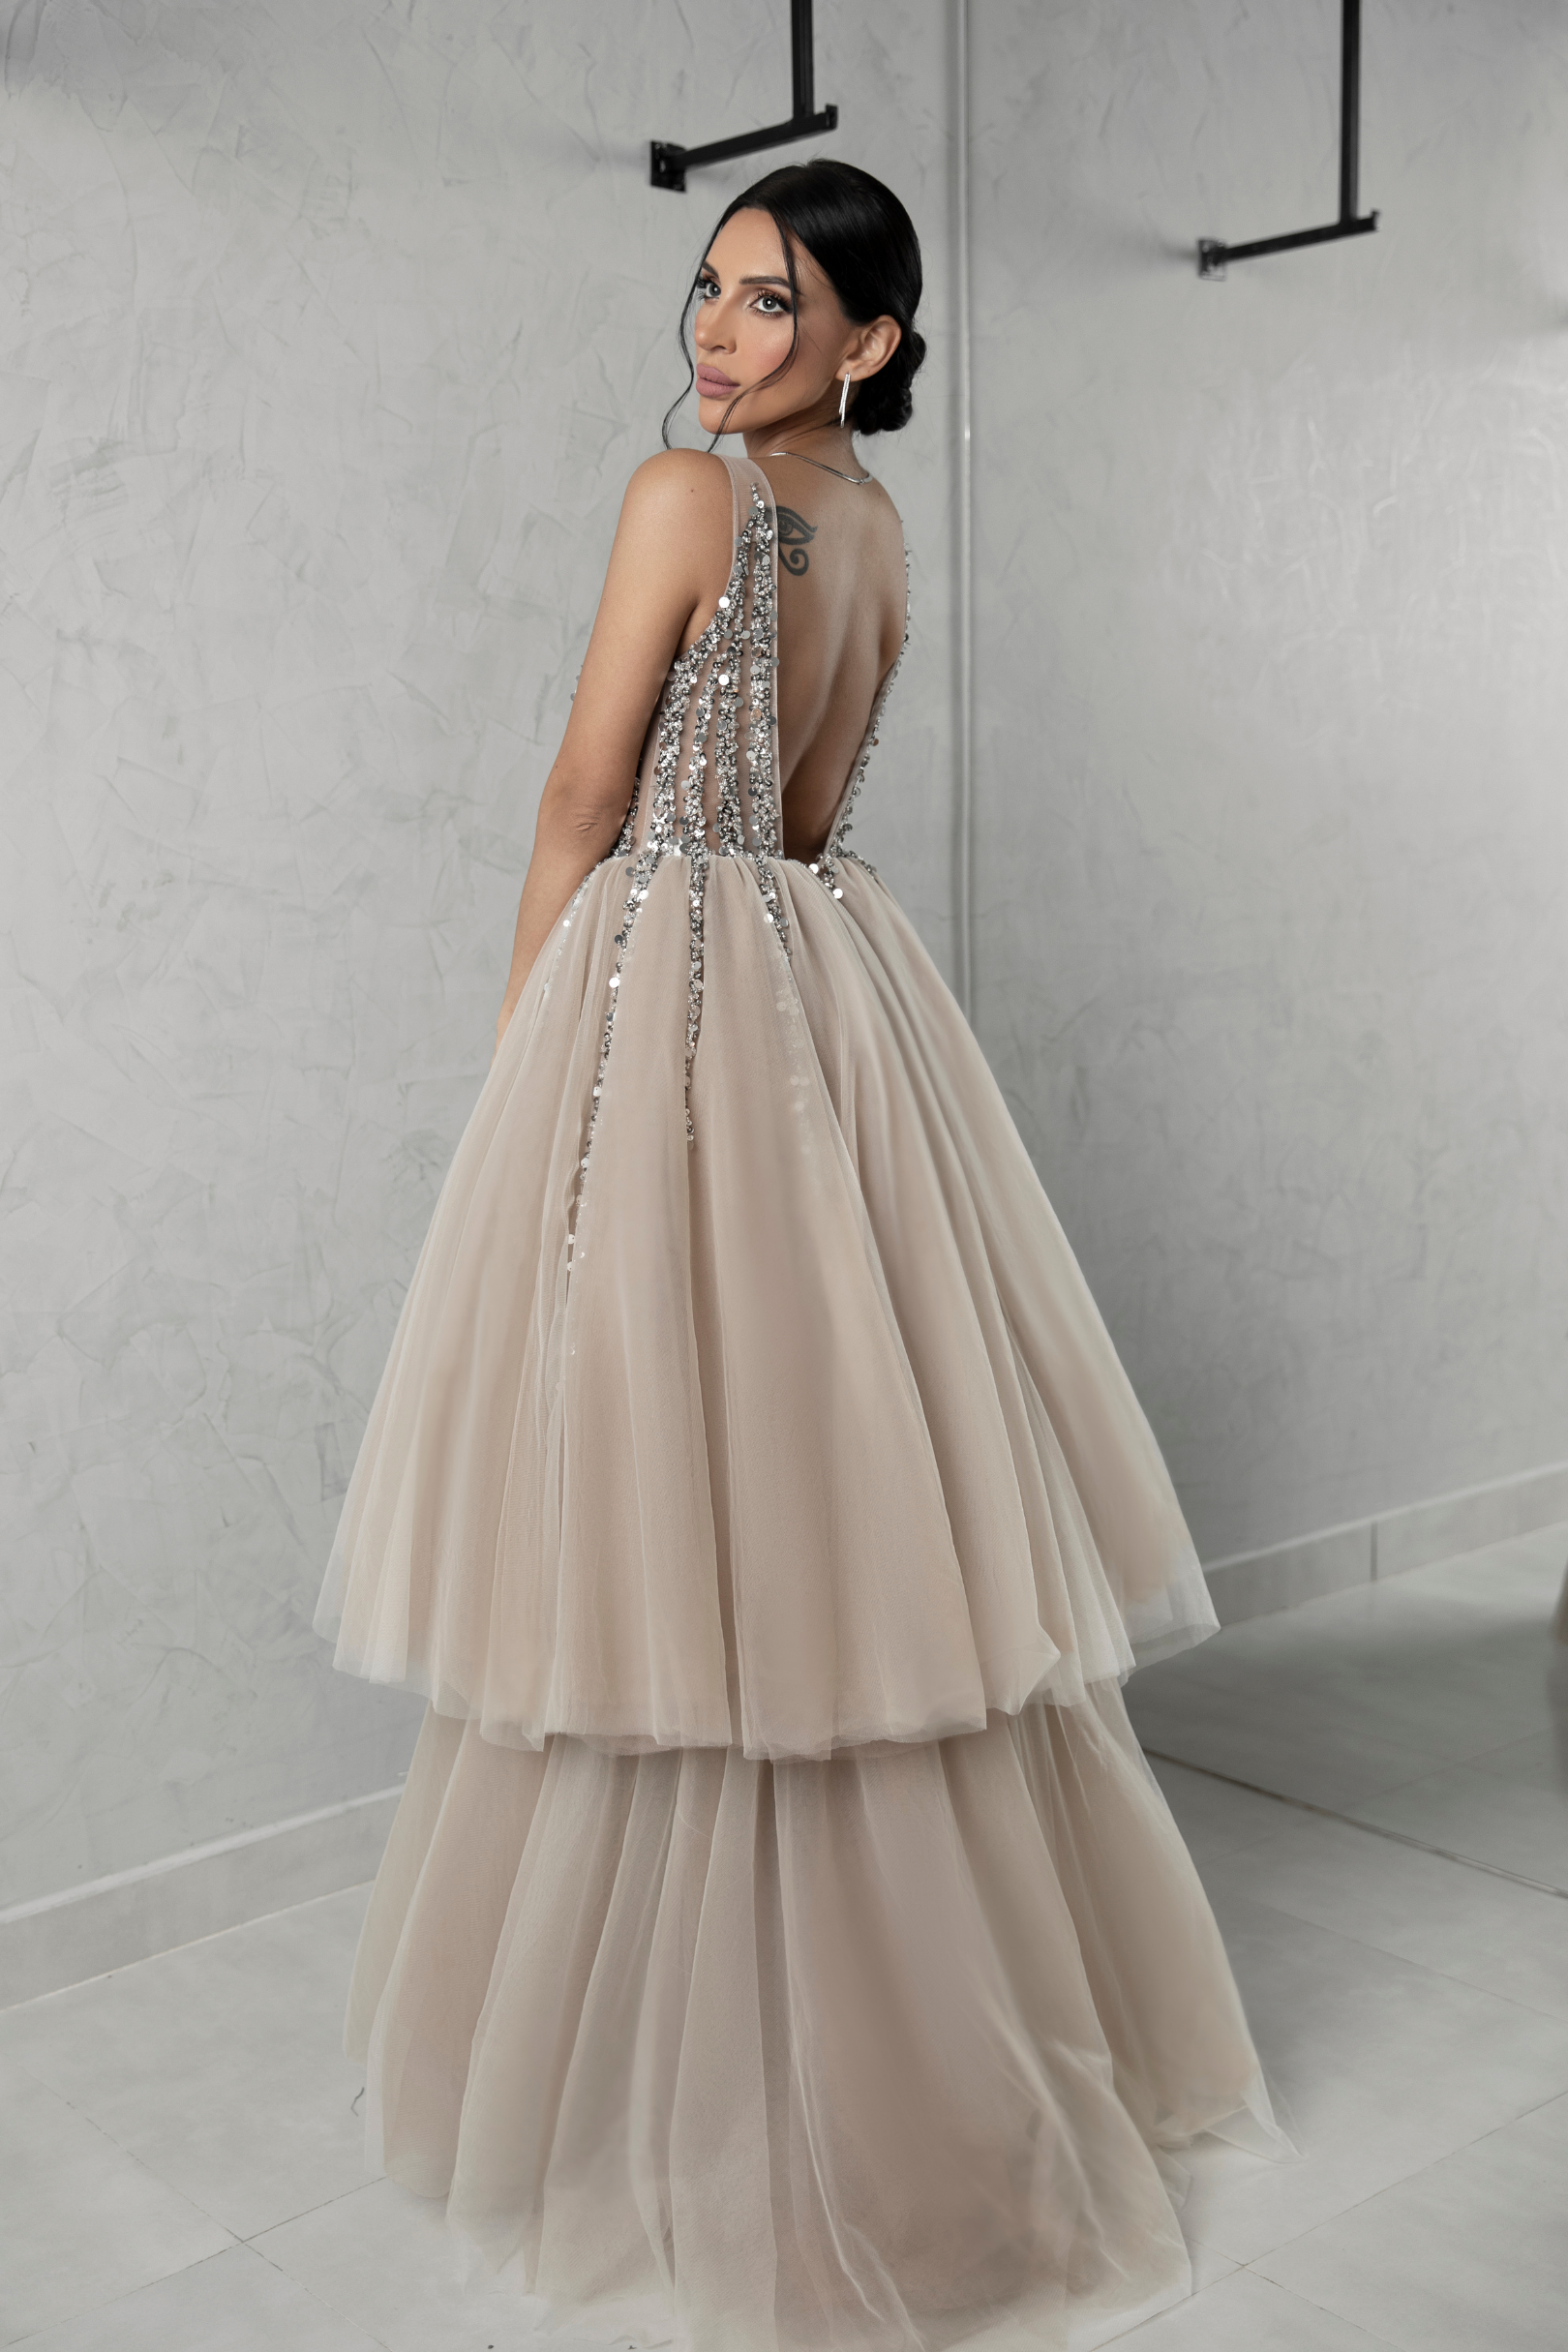 Evening dress decorated with shiny stones on the chest and two layers of tulle